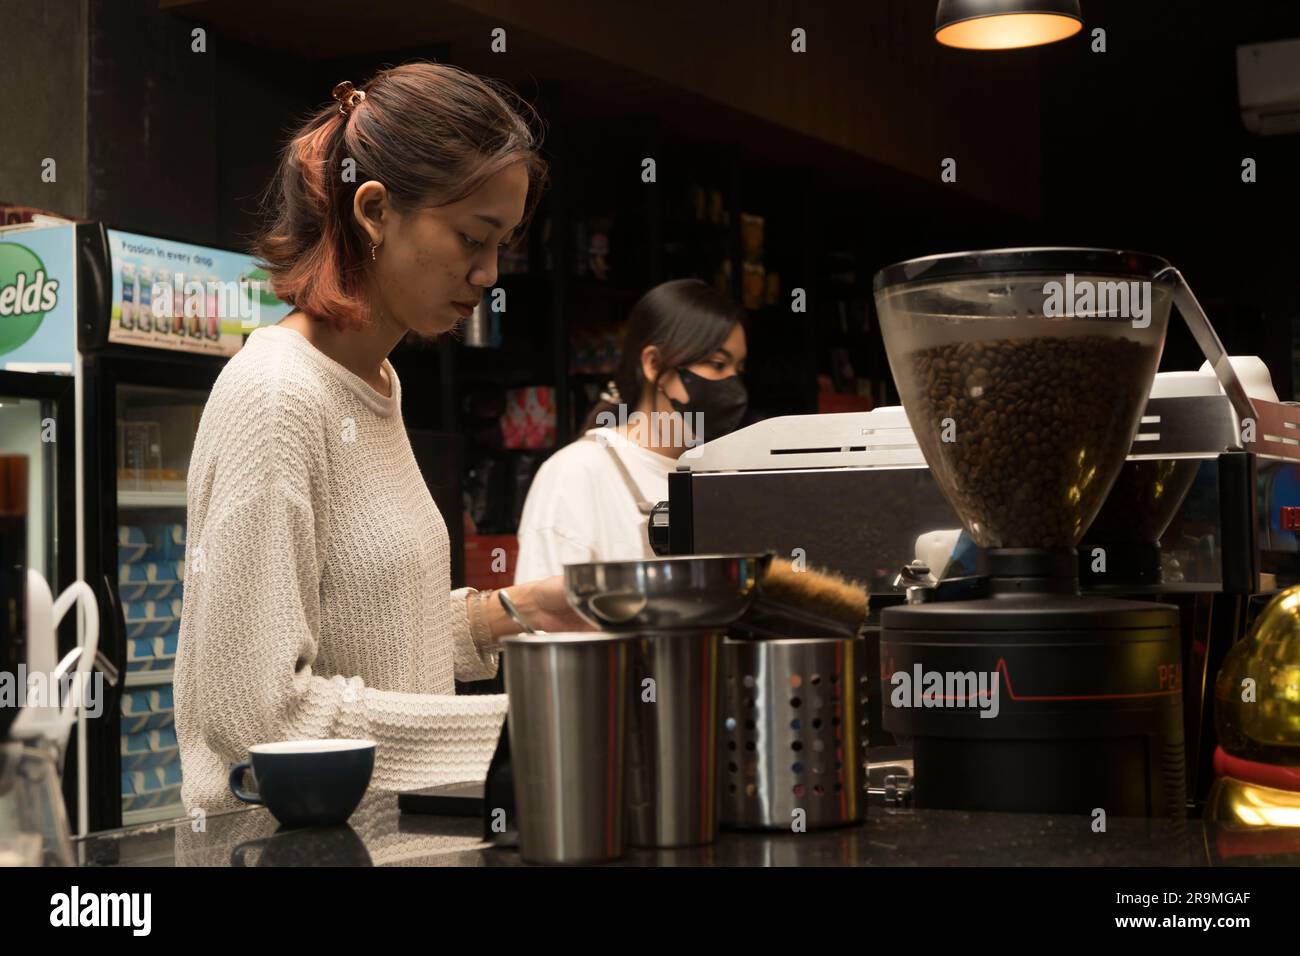 June 1, 2023. Woman barista preparing coffee for customer at the coffe shop in Yogykarta, Indonesia. People in action photography. Stock Photo